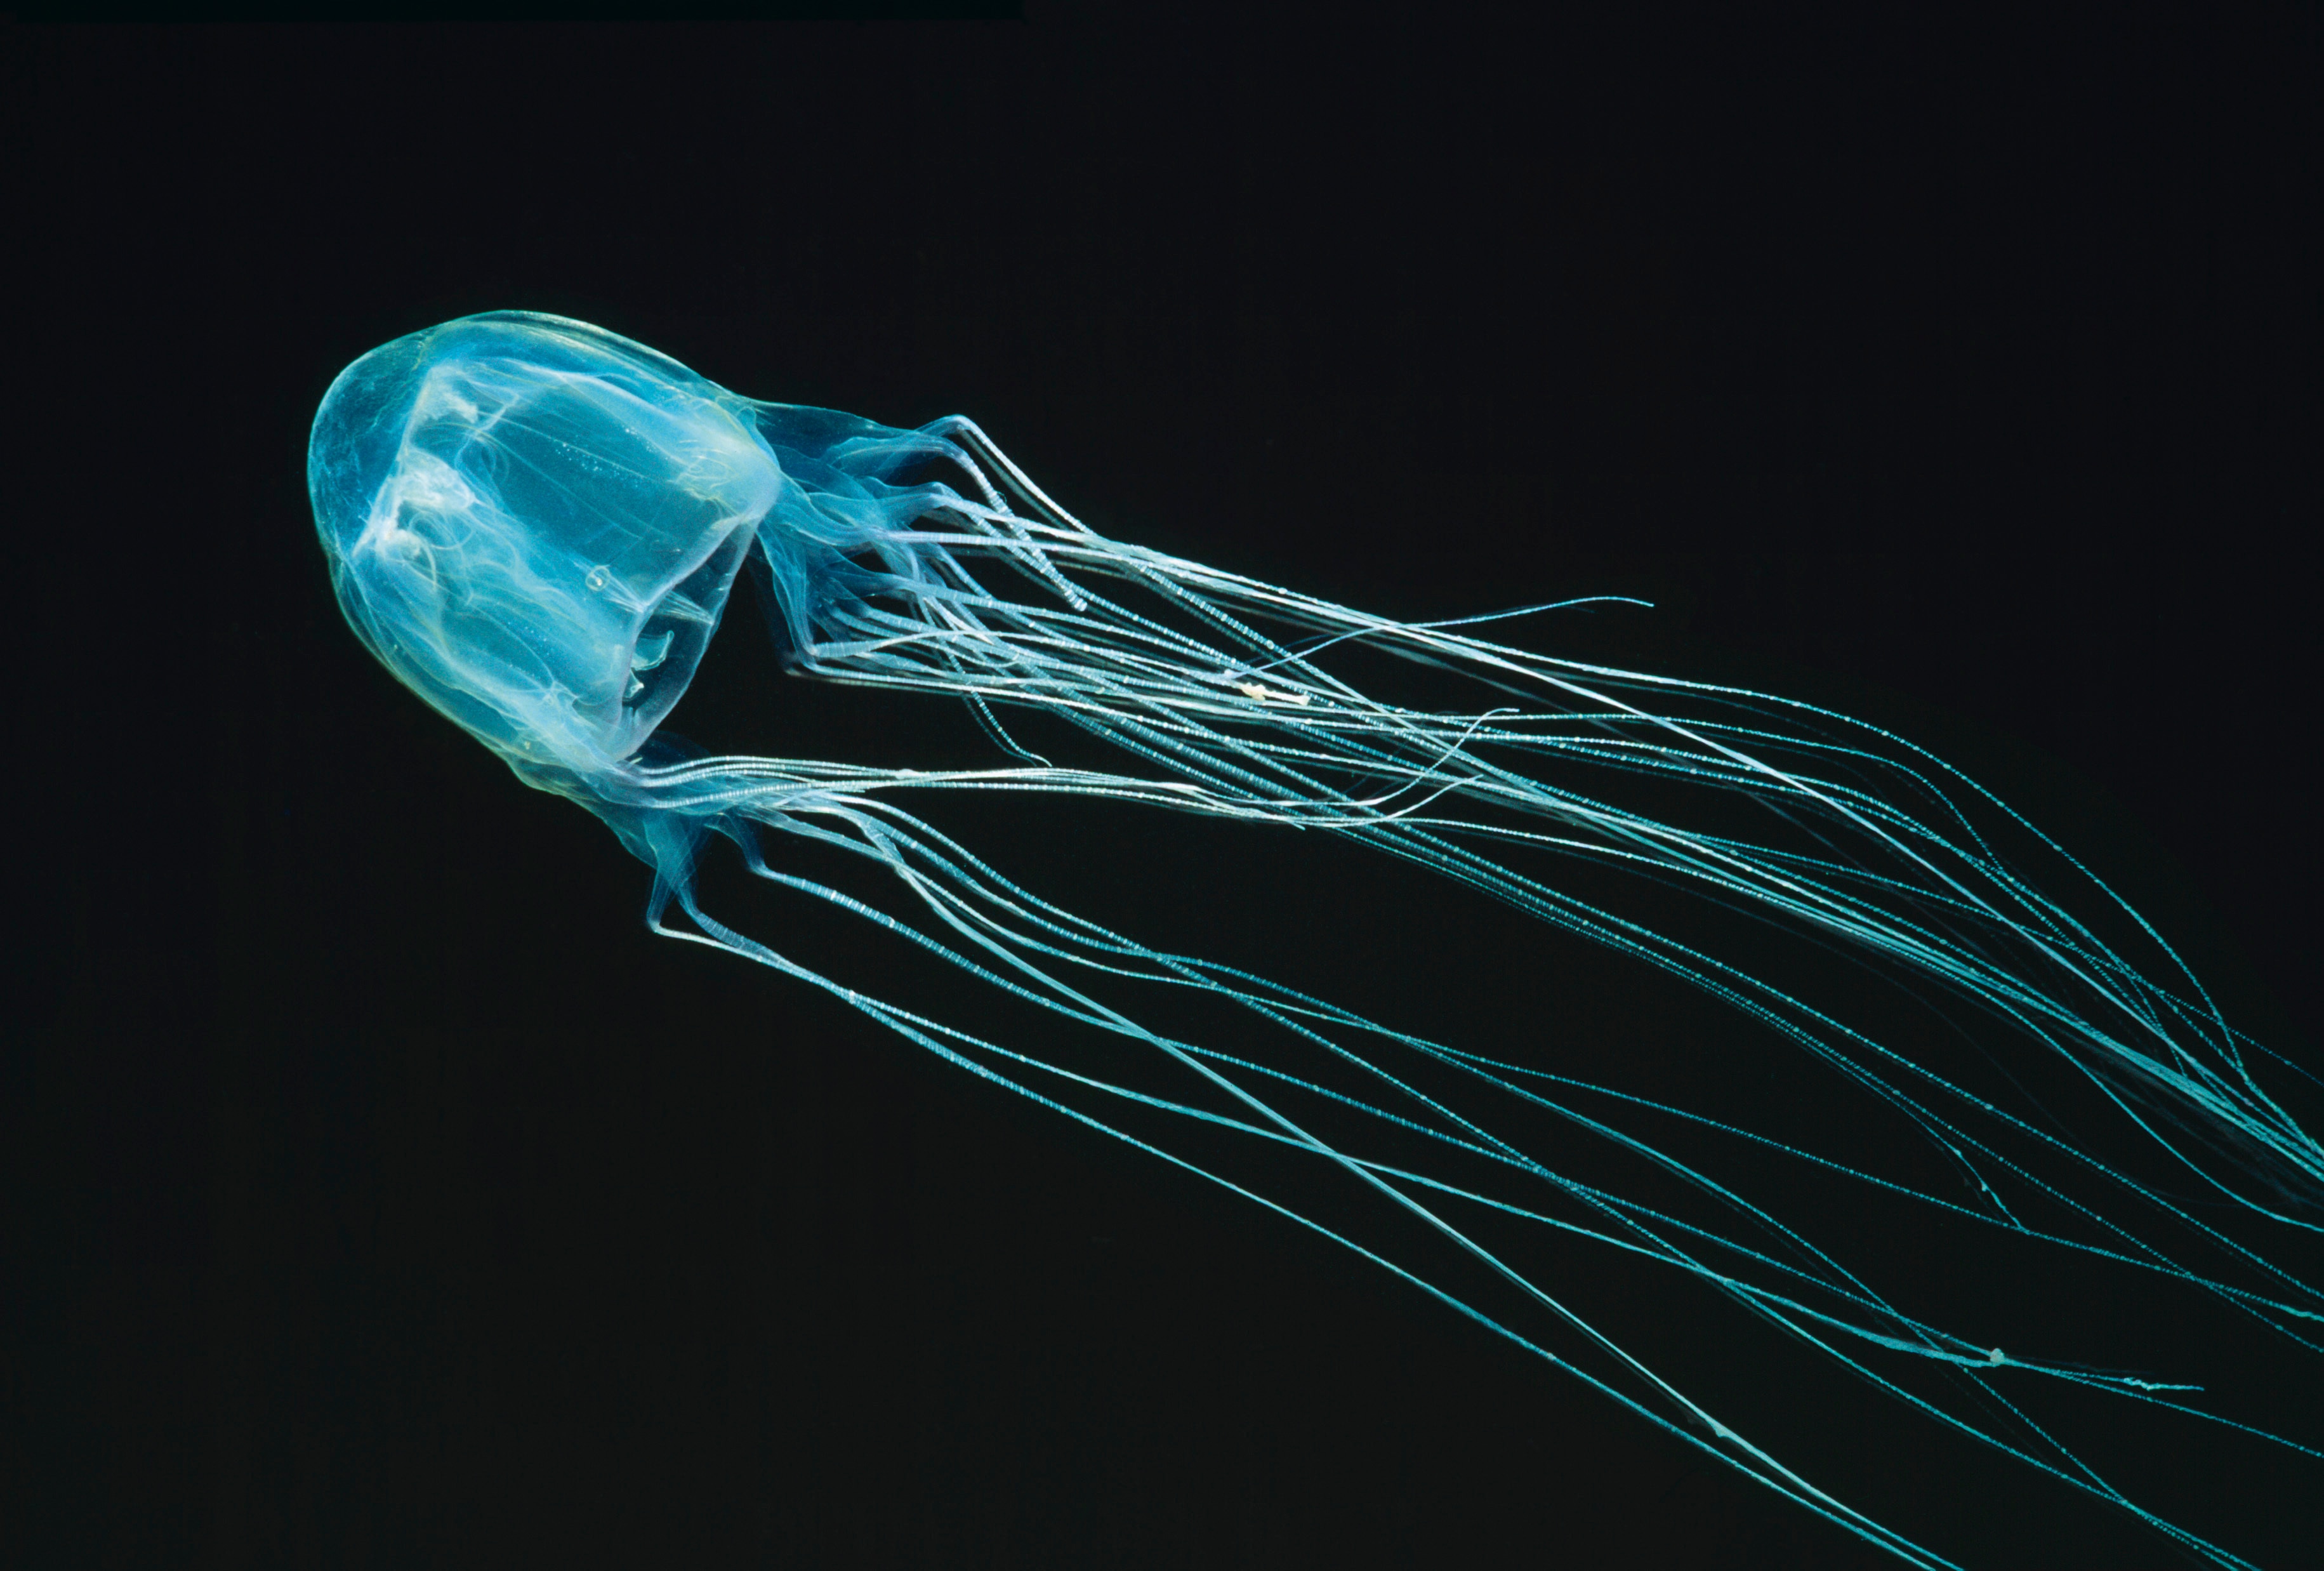 Pain find antidote deadly box jellyfish sting - The University of Sydney